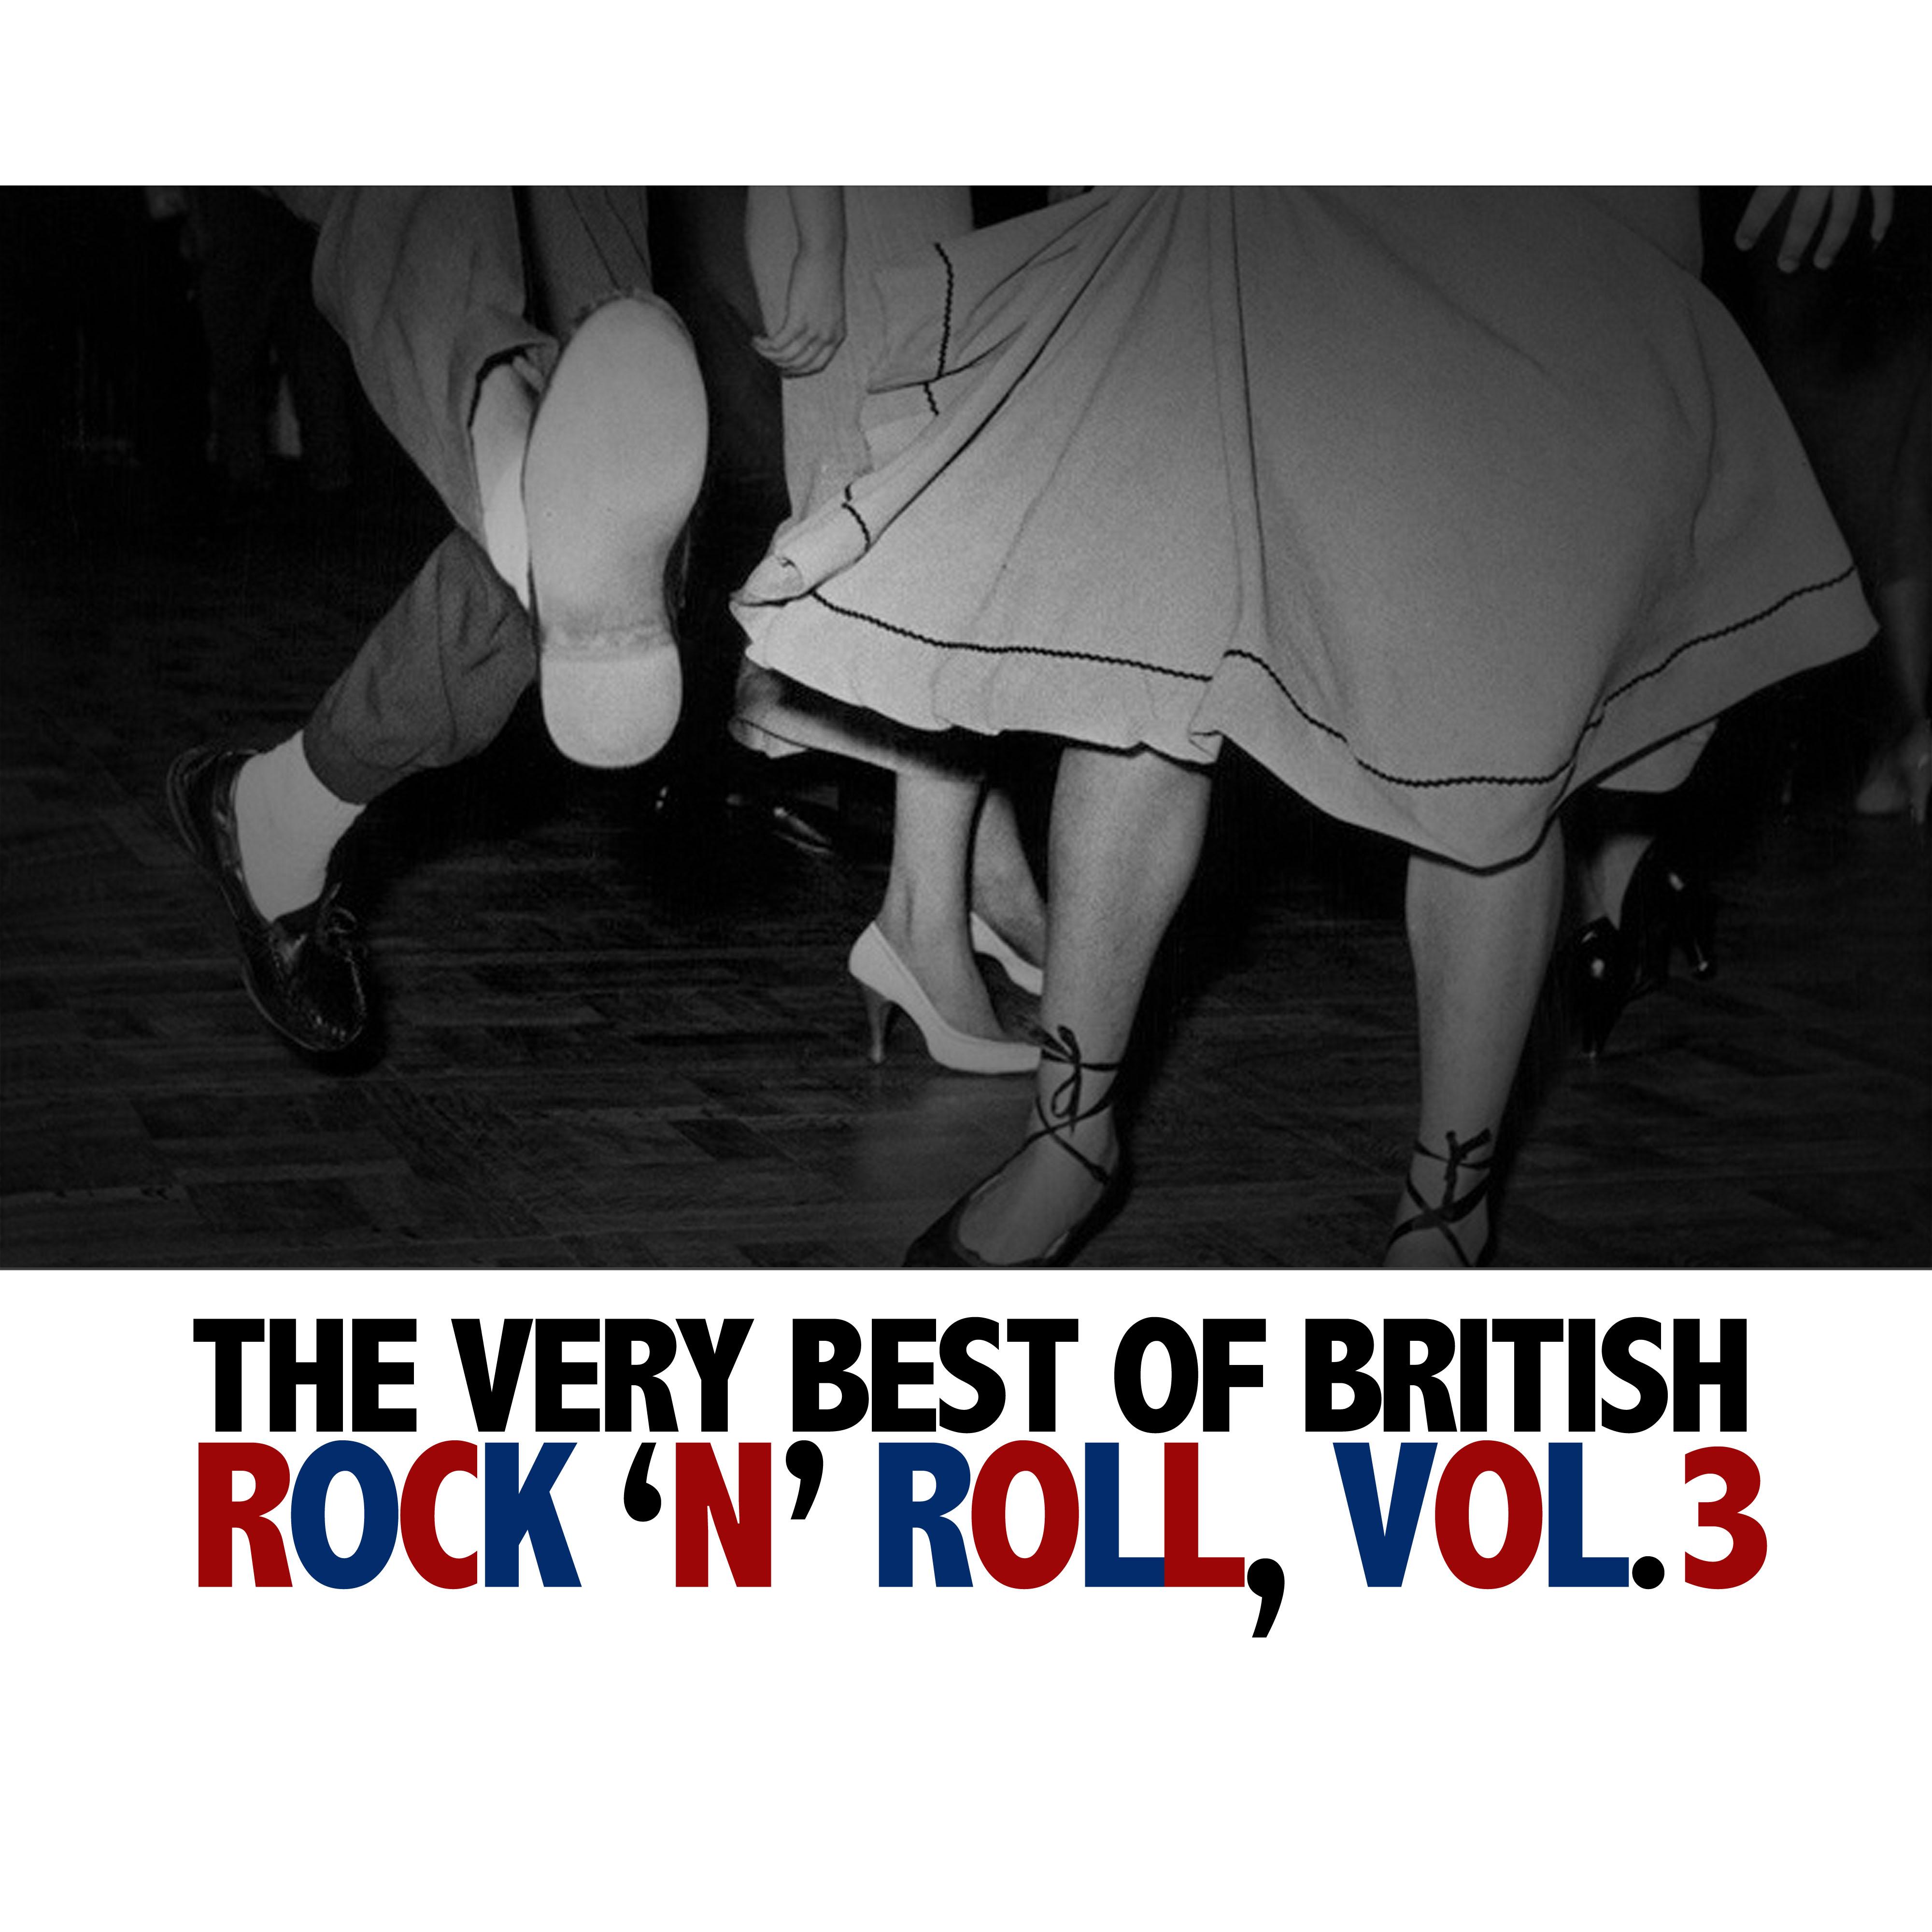 The Very Best of British Rock 'N' Roll, Vol. 3